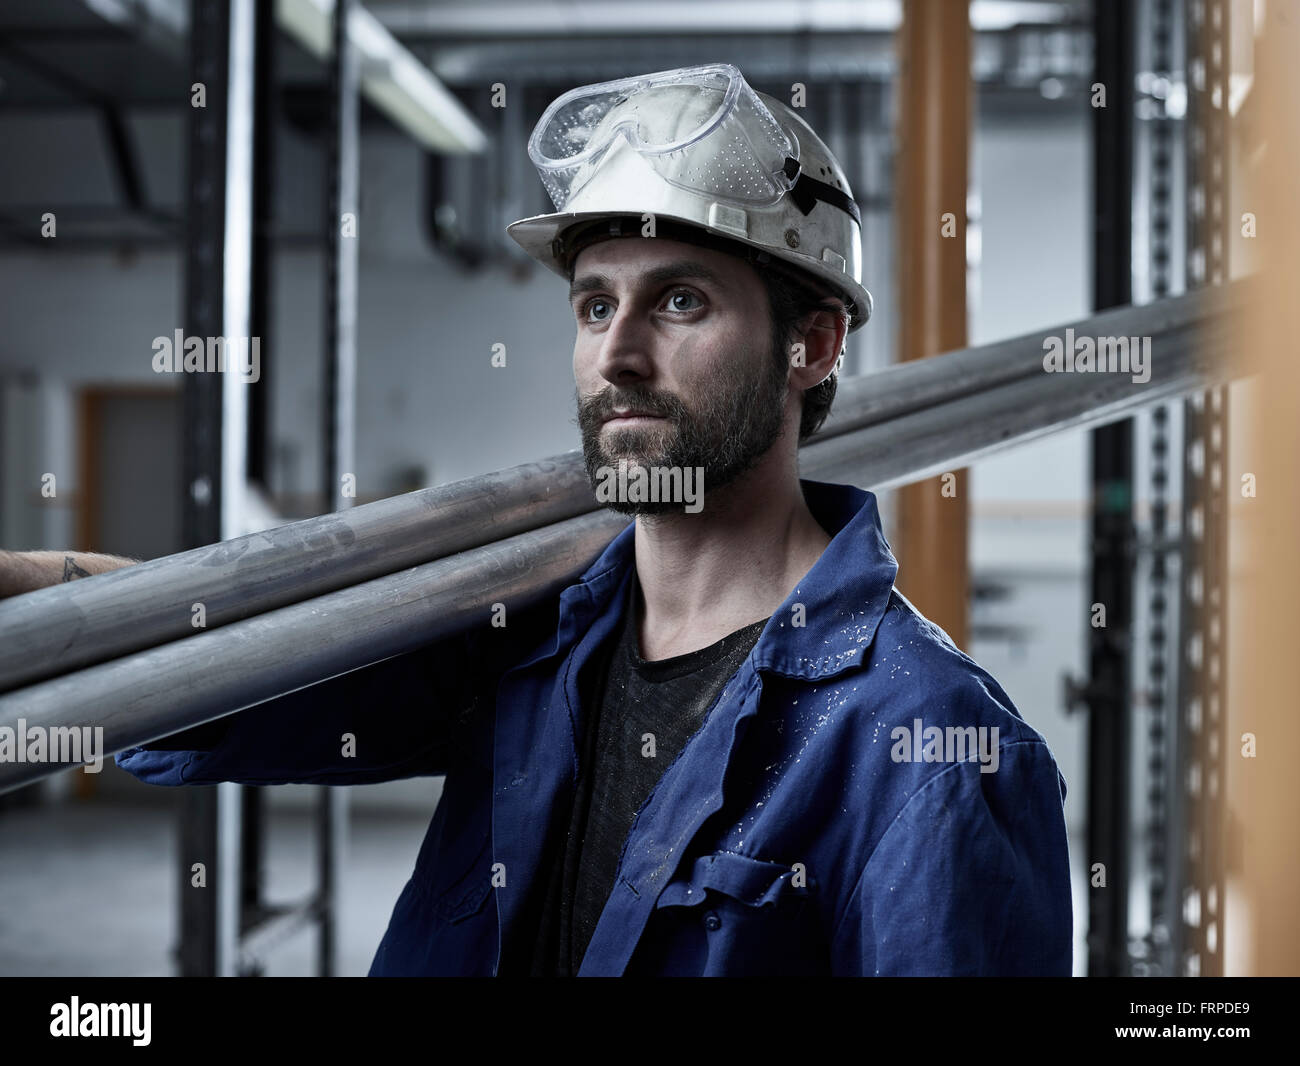 Worker, mechanic with helmet and safety goggles carrying pipes on his shoulder, Austria Stock Photo